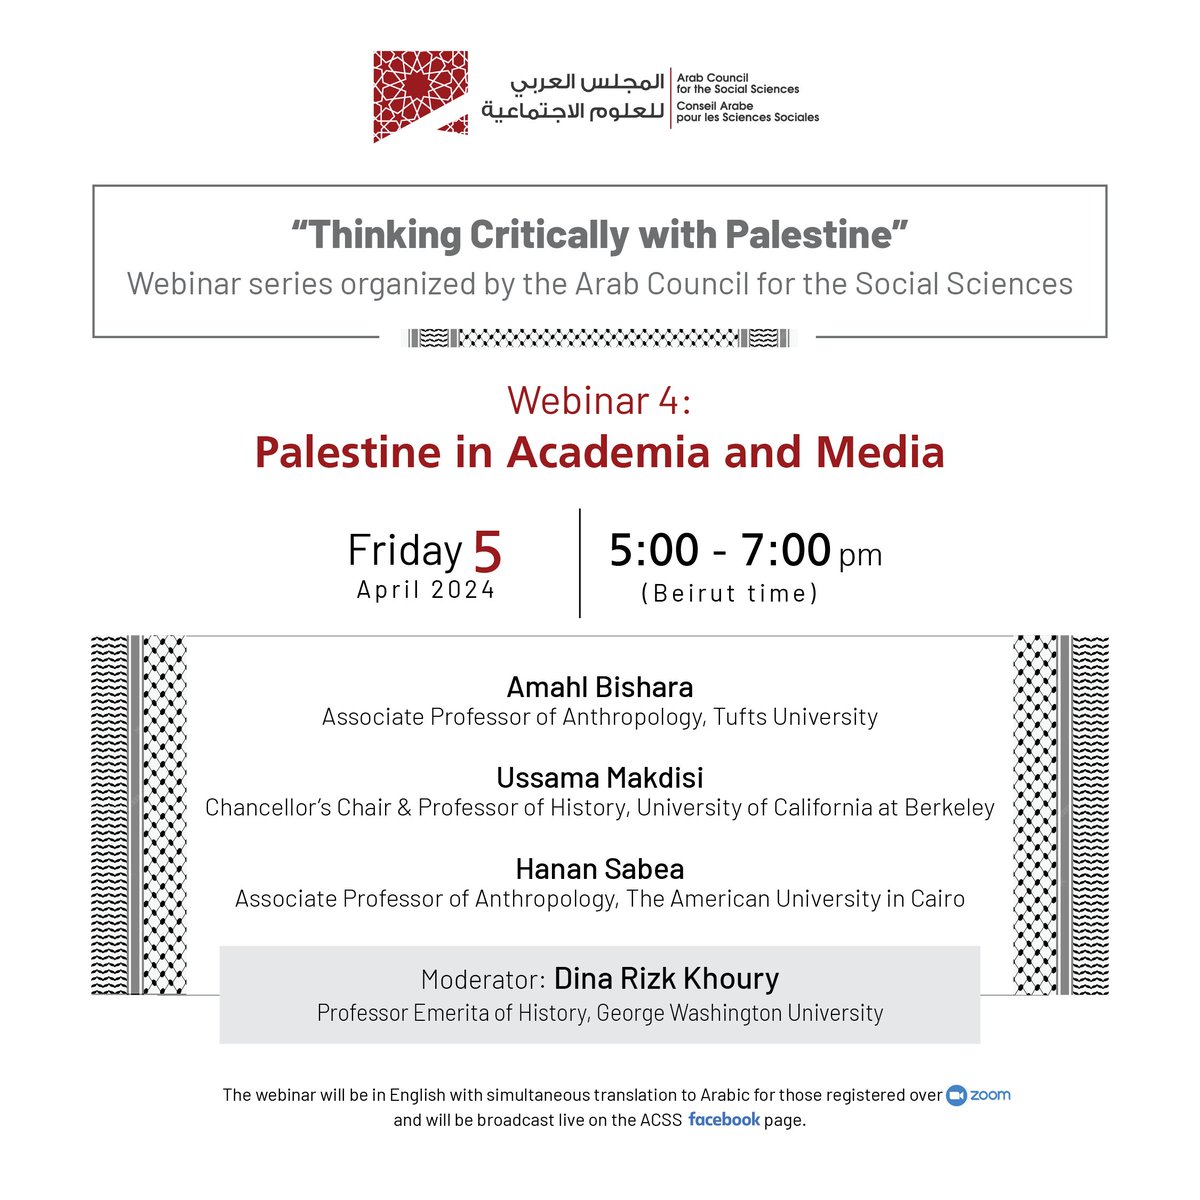 Join us tomorrow! Webinar 4: “Palestine in Academia and Media” Date: Friday, April 5, 2024 Time: 5:00-7:00pm (Beirut time) To register: us02web.zoom.us/webinar/regist…